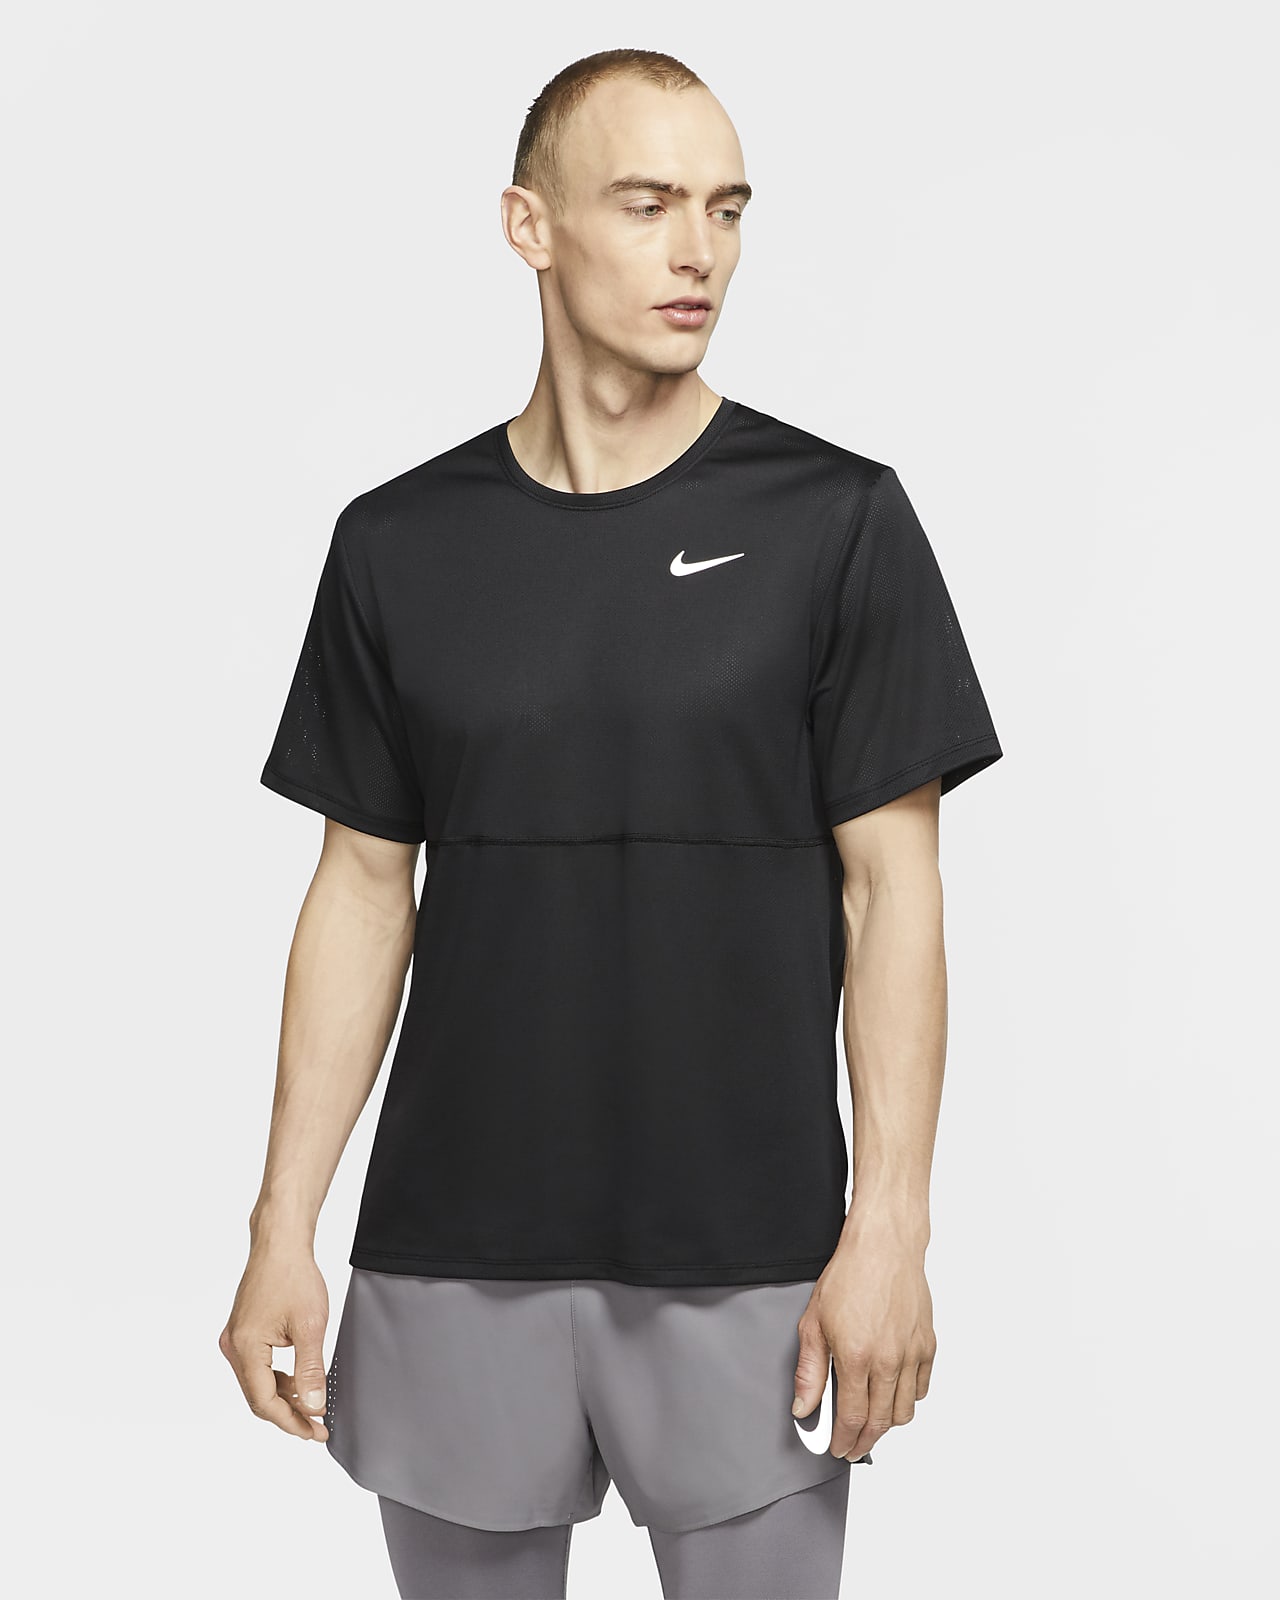 nike running outfit